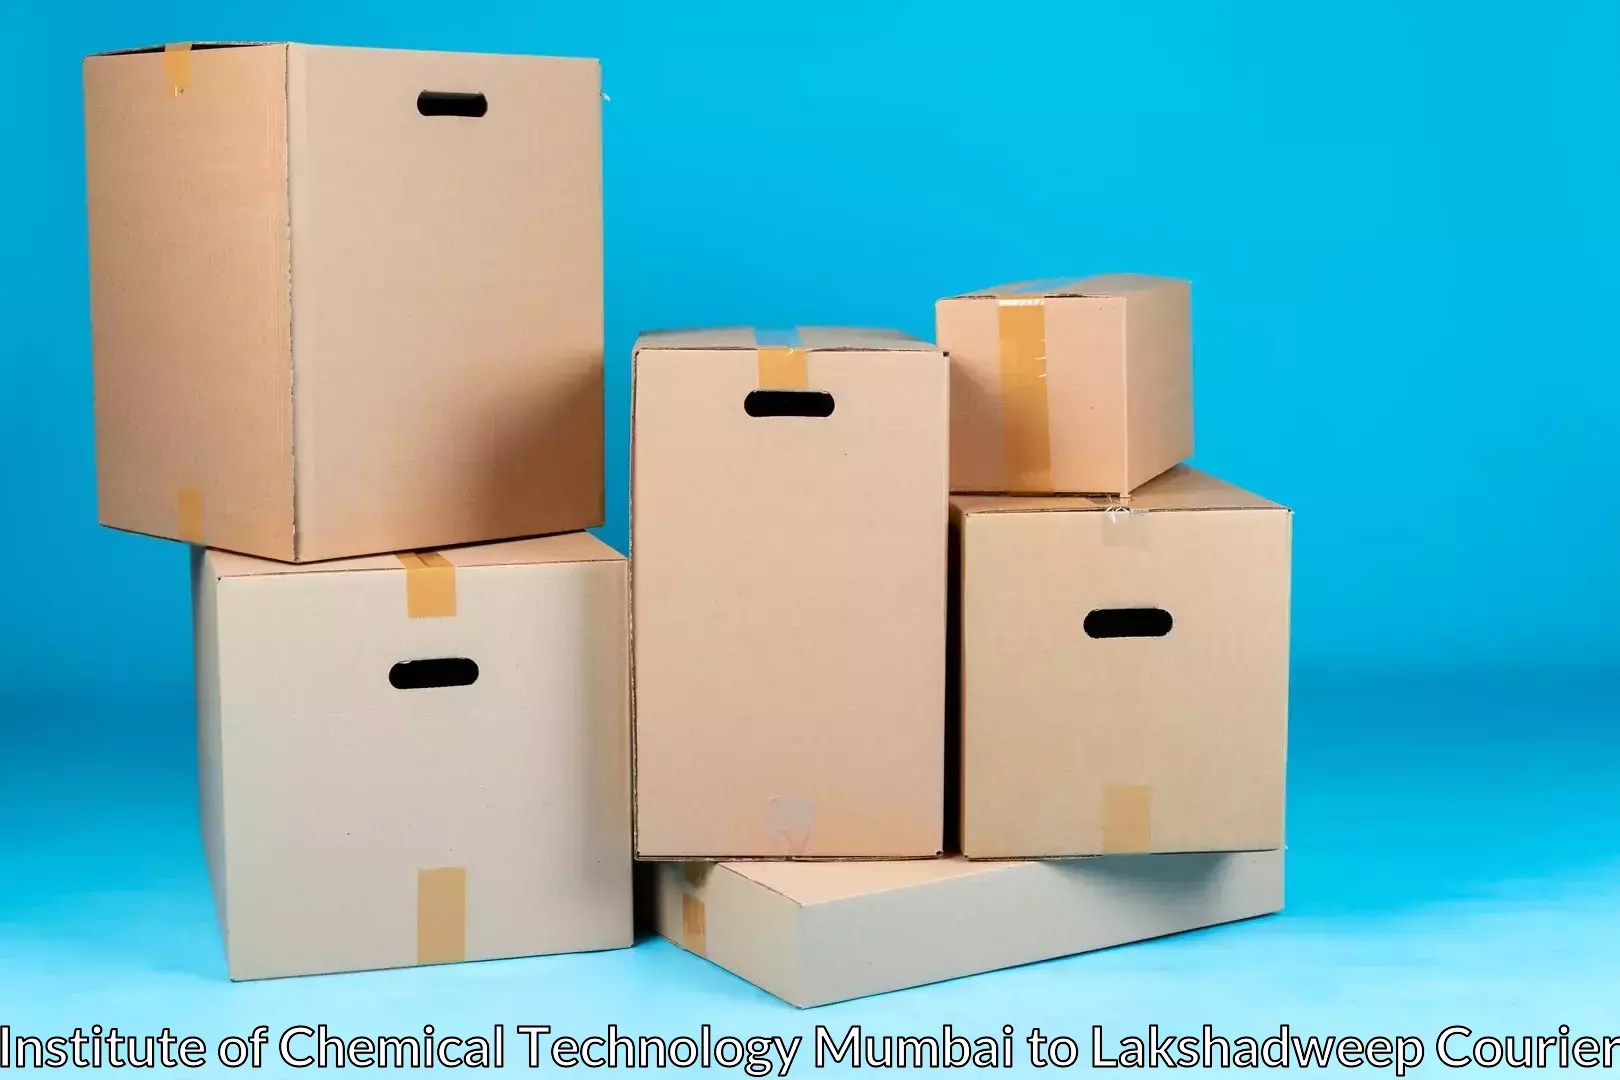 Home furniture shifting Institute of Chemical Technology Mumbai to Lakshadweep